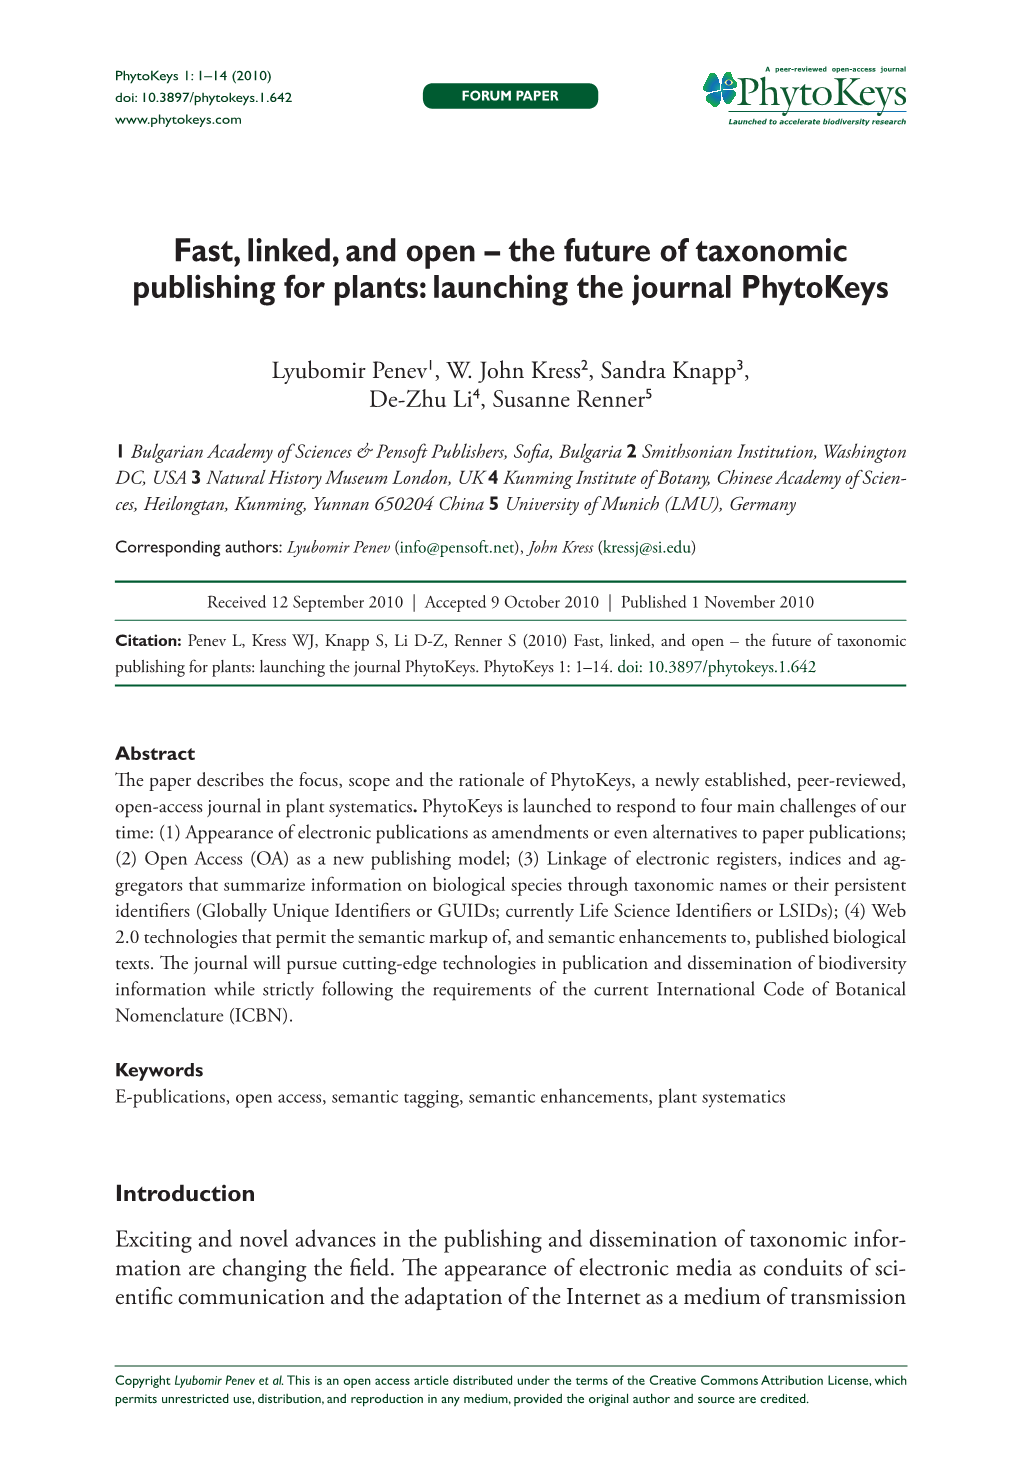 The Future of Taxonomic Publishing for Plants: Launching the Journal Phytokeys